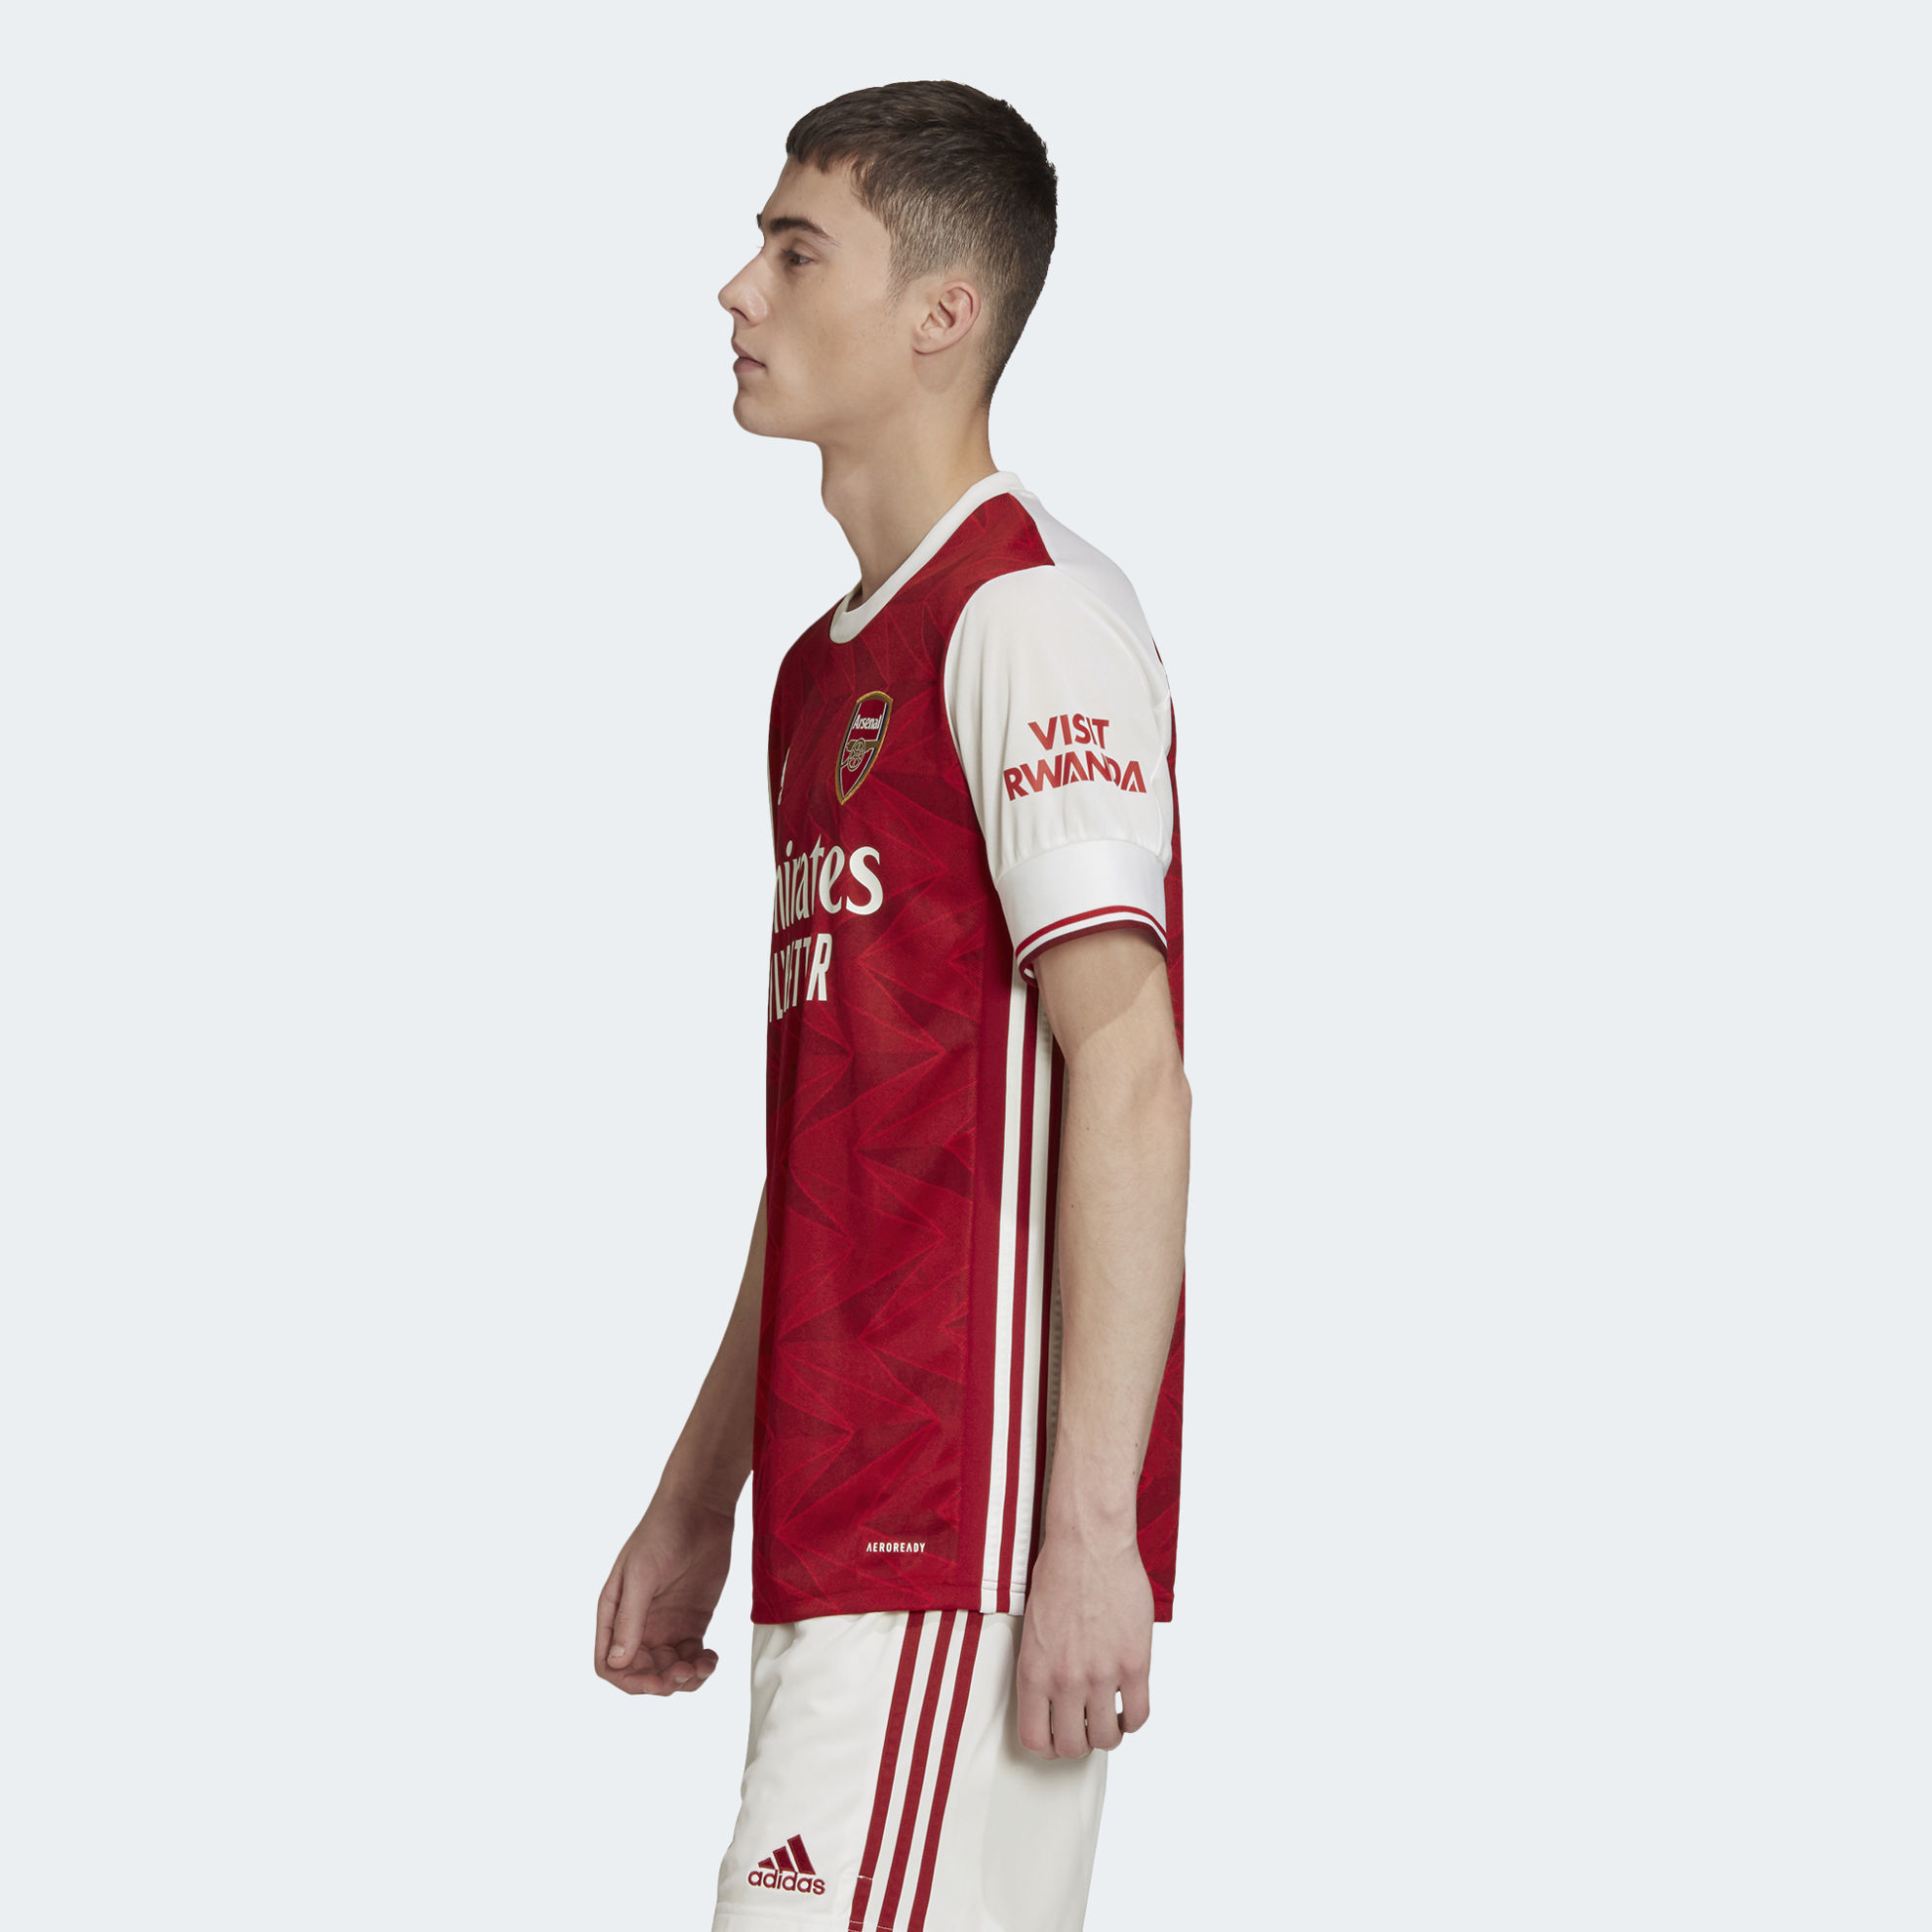 arsenal home jersey 2021